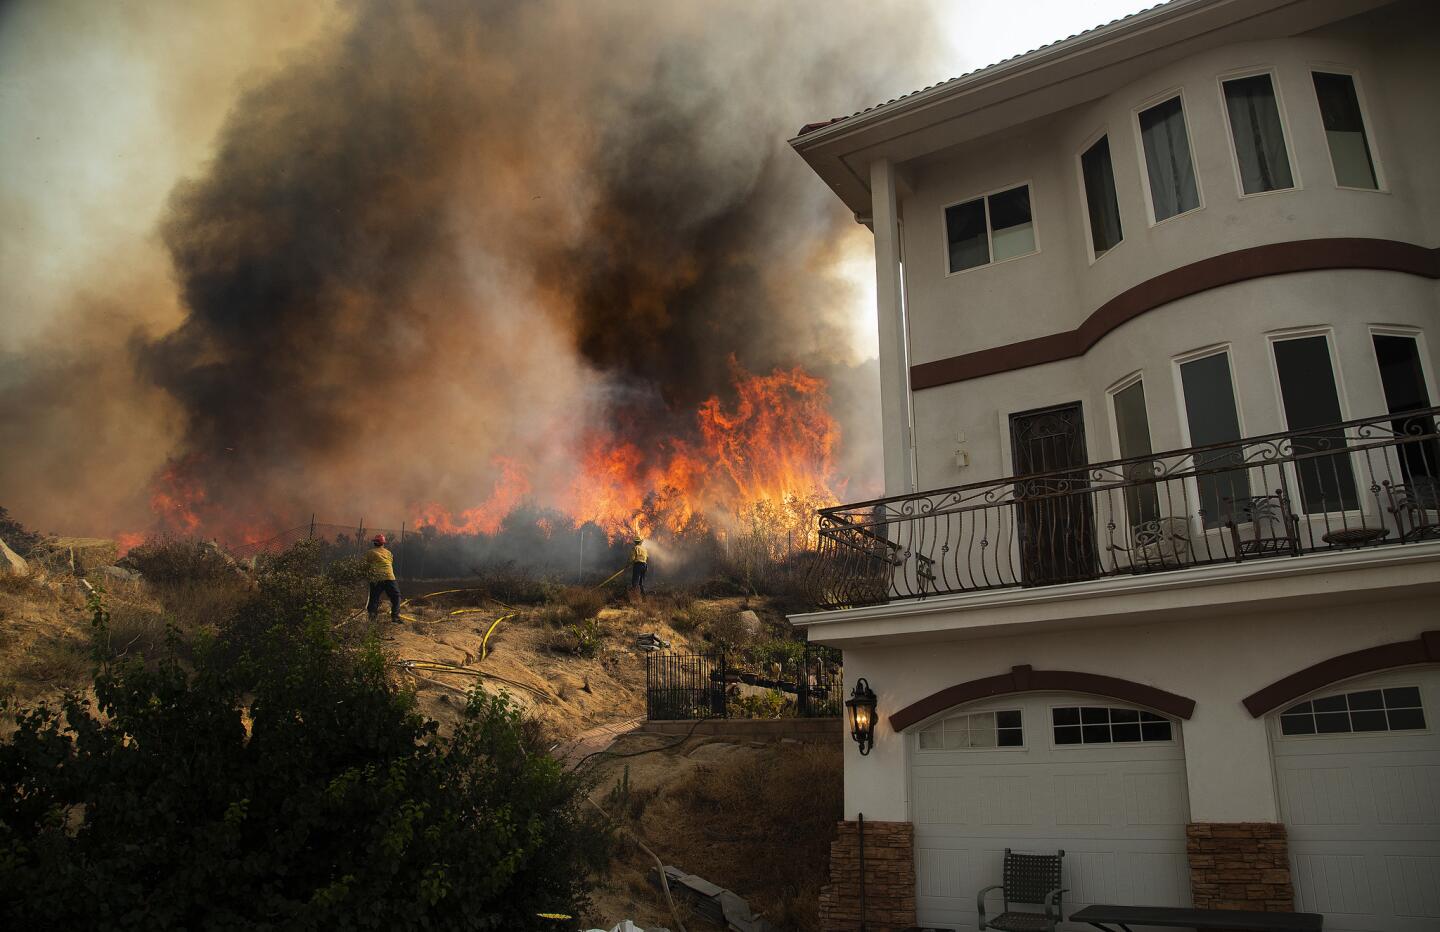 Afternoon winds fan flames close to a home north of Grand Avenue in Lake Elsinore, Calif.